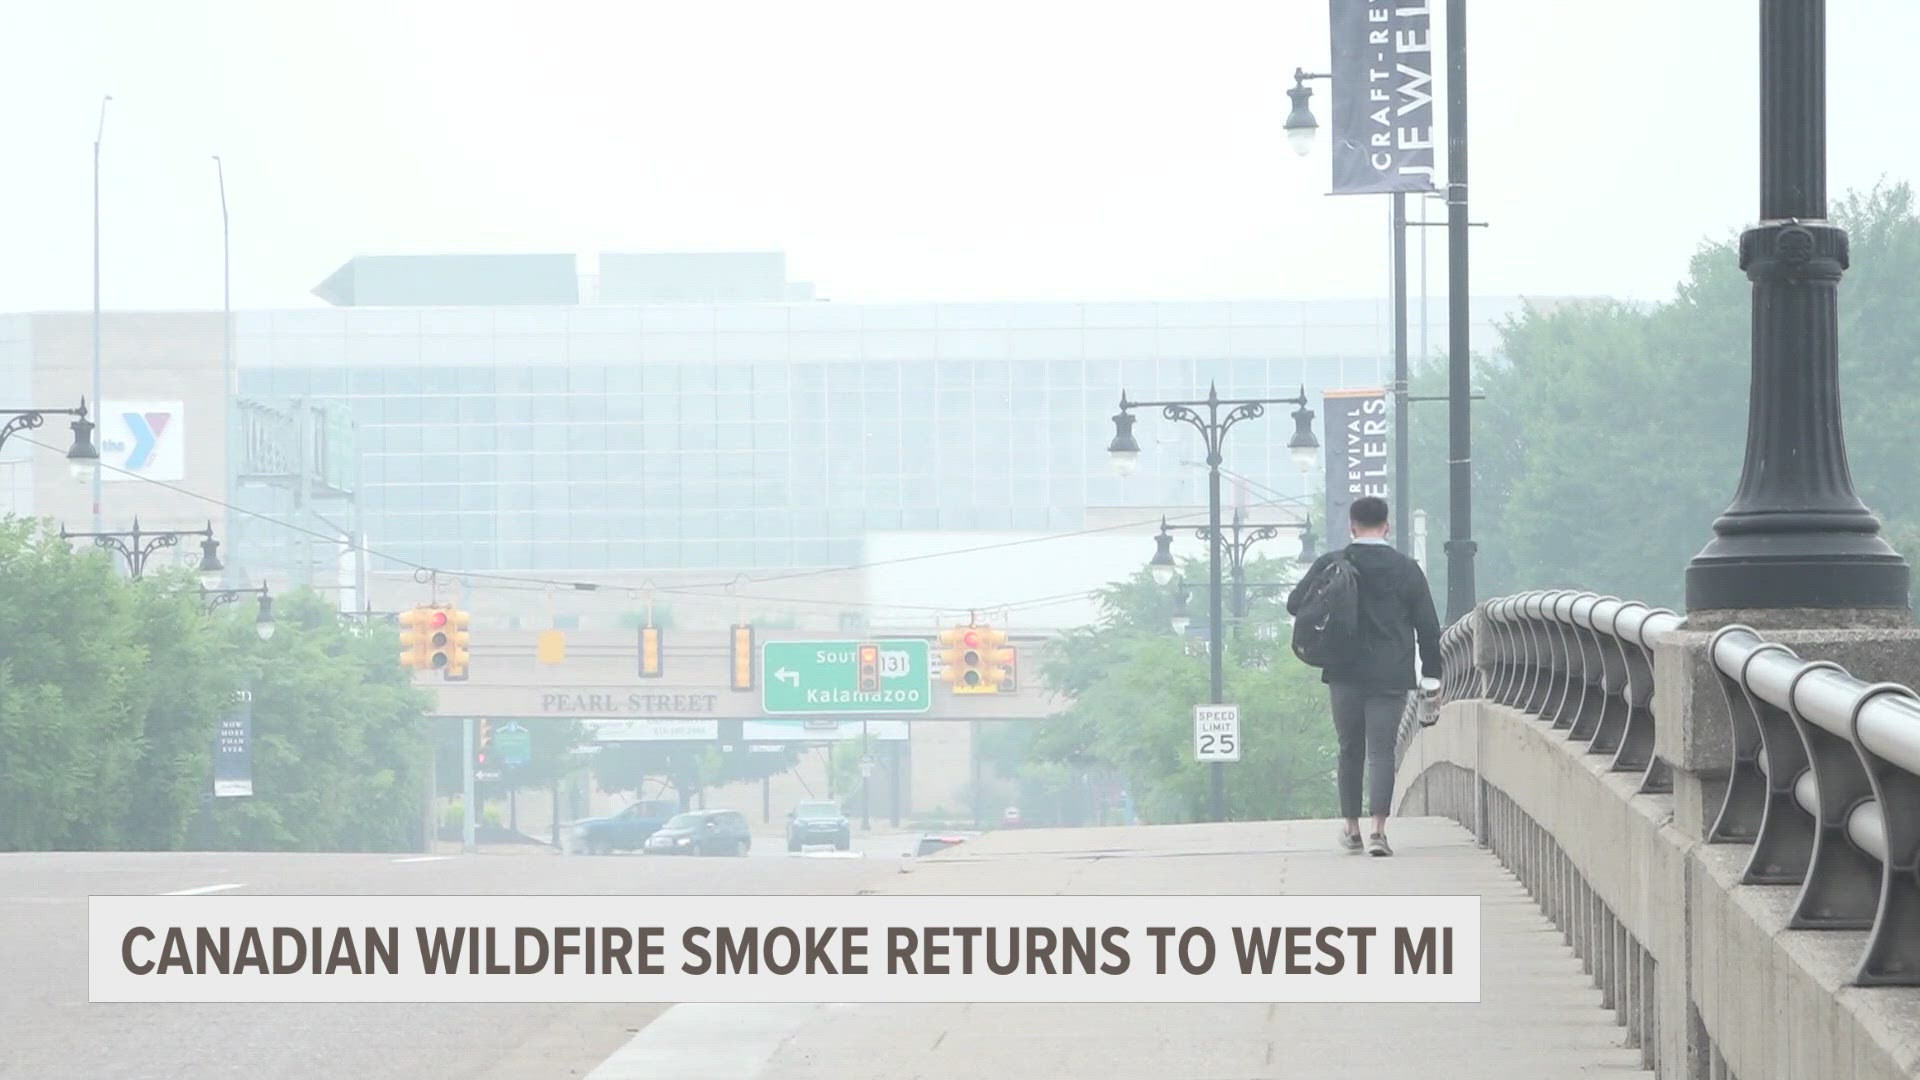 More than 100 fires are burning in Canada, with that smoke now making its way into the U.S. Last summer, this issue caused air quality problems in Michigan.